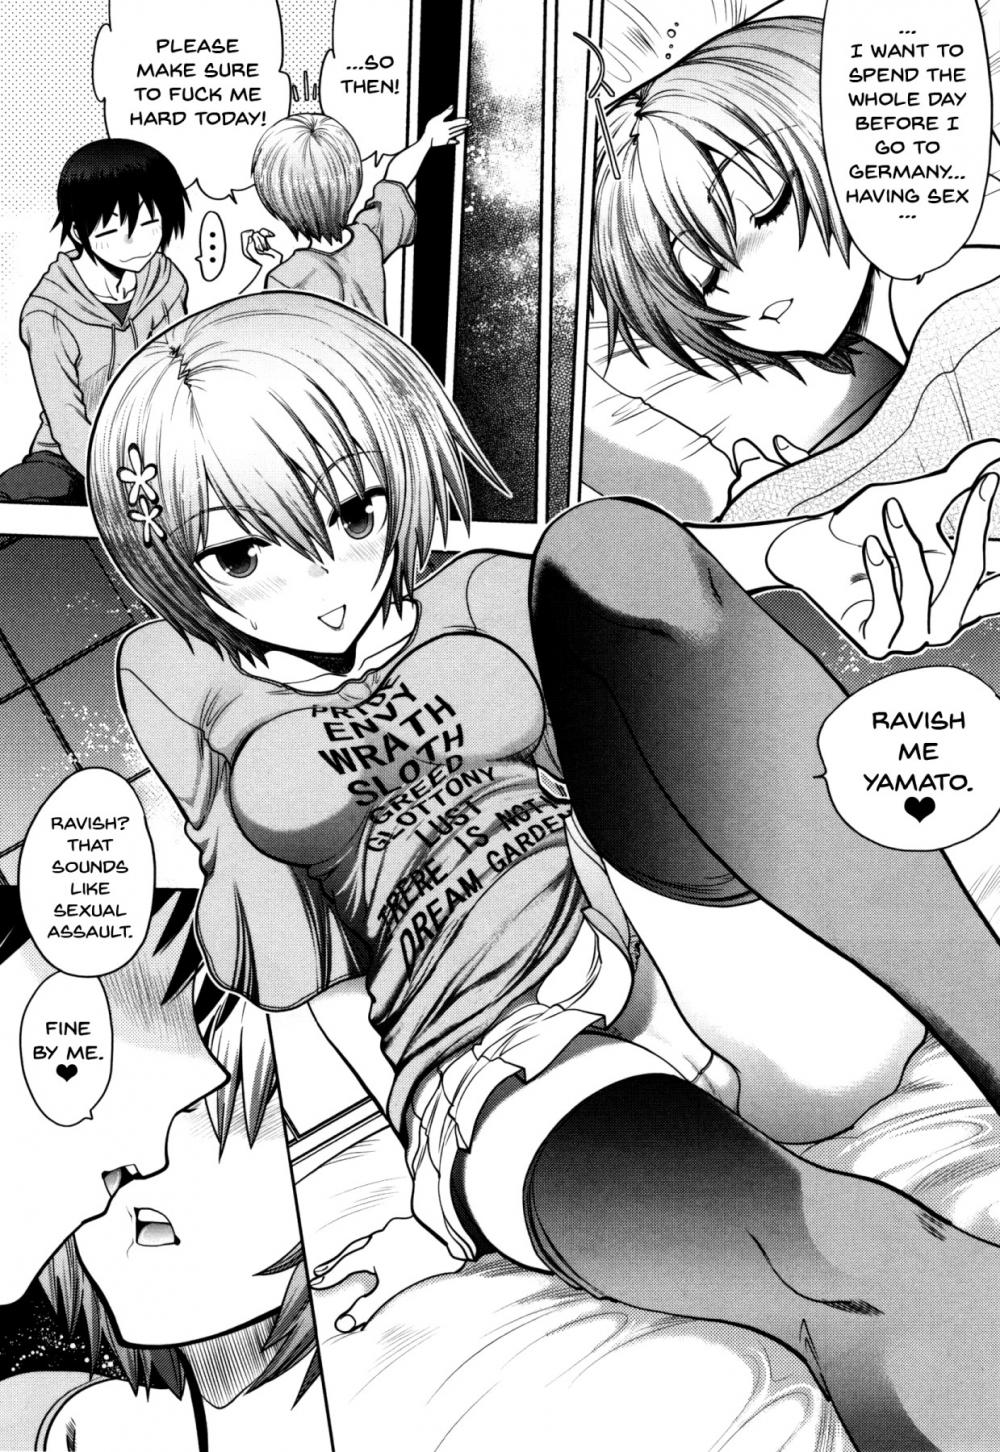 Hentai Manga Comic-Fall In Love With Me For Real!-v22m-Chapter 6-3